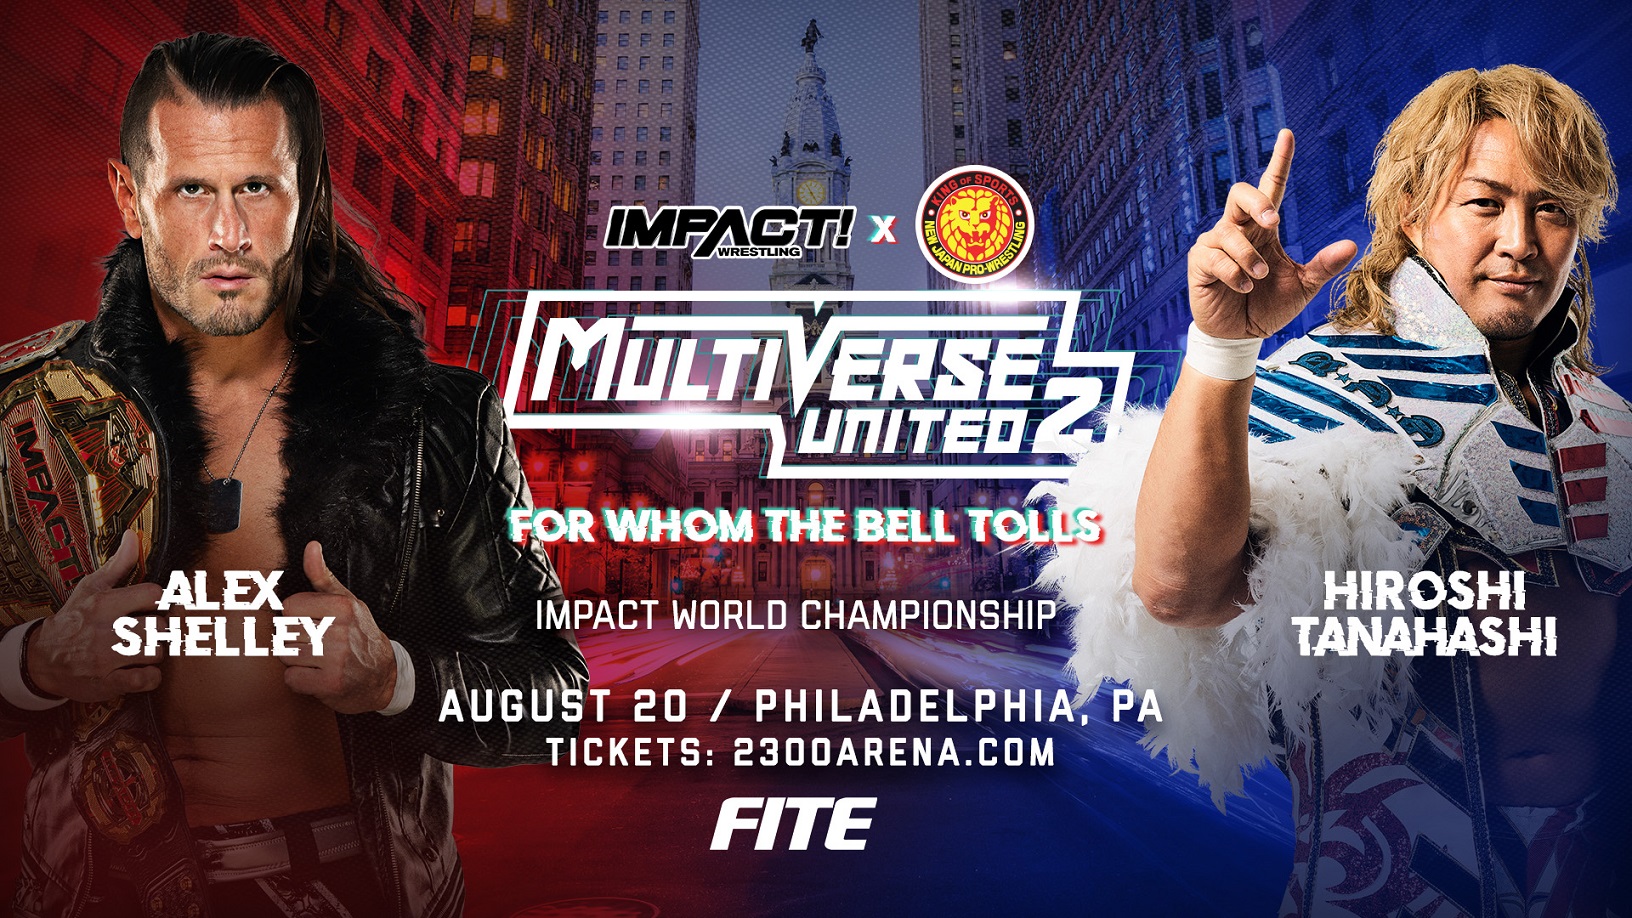 Hiroshi Tanahashi Accepts Alex Shelley’s Challenge for IMPACT World Title Dream Match at Multiverse United 2